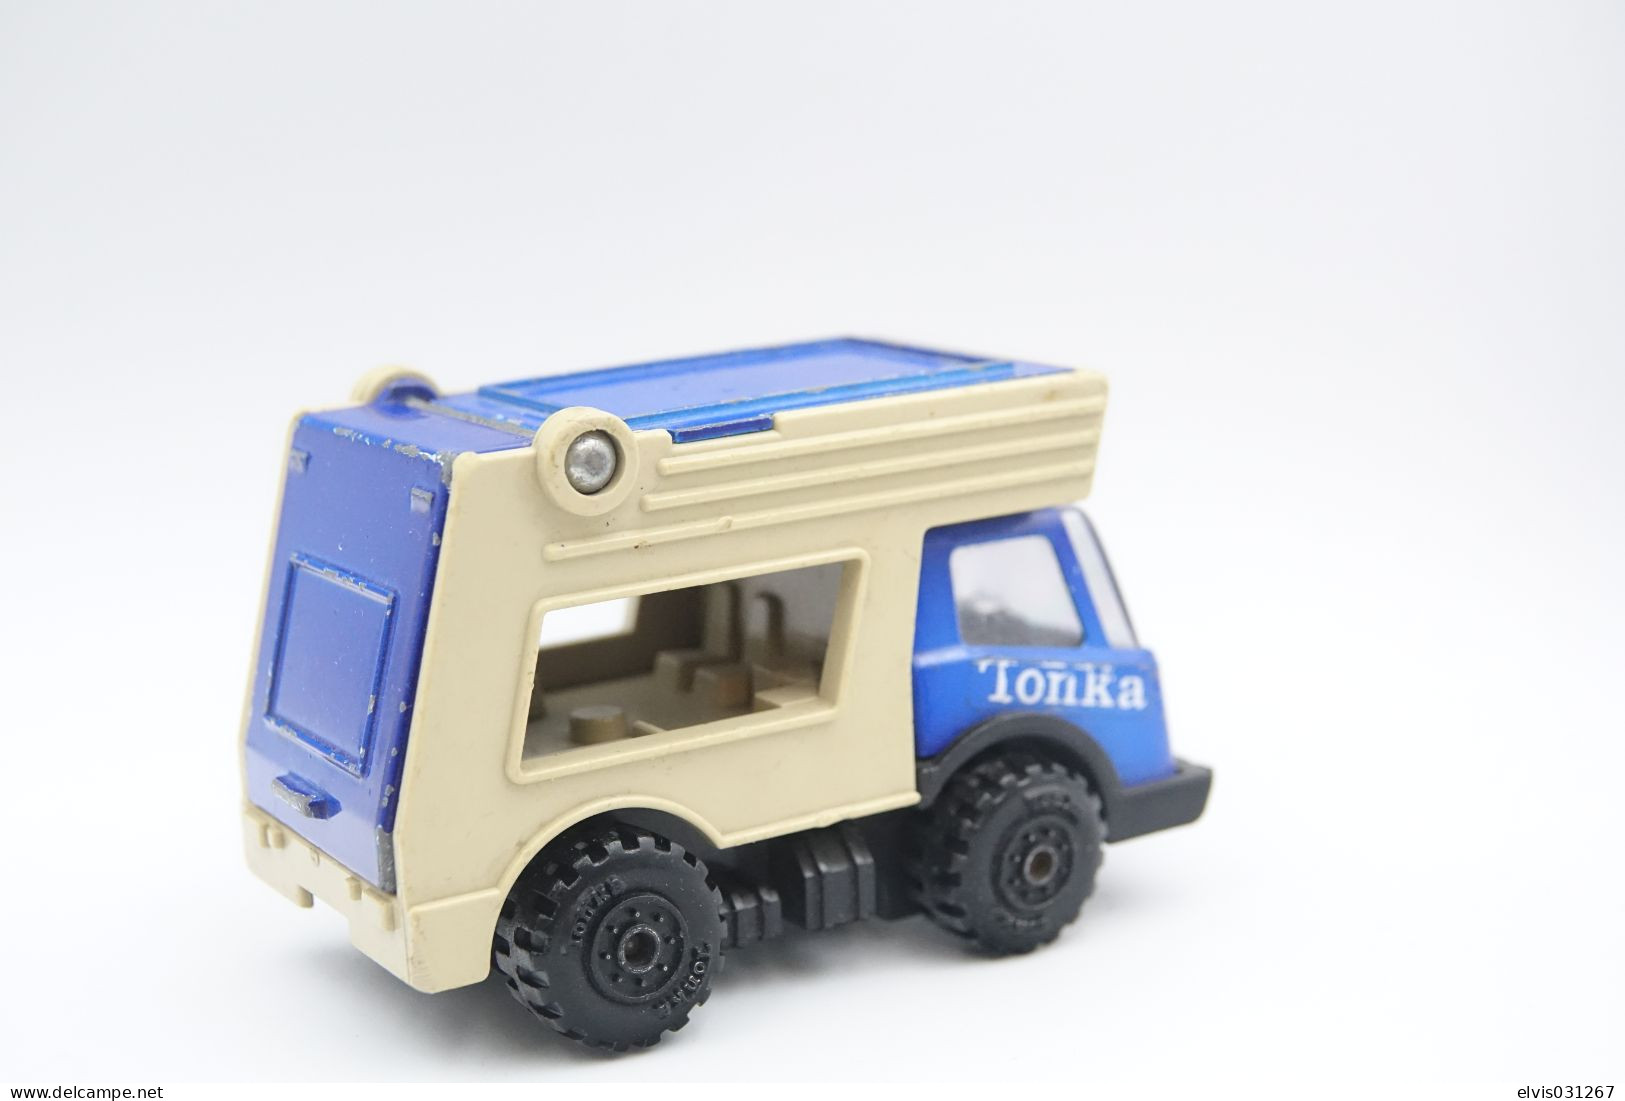 Tonka Toy , CAR HAULER CARRIER TRANSPORT BLUE & WHITE, Made In Japan, 1970's *** - Dinky